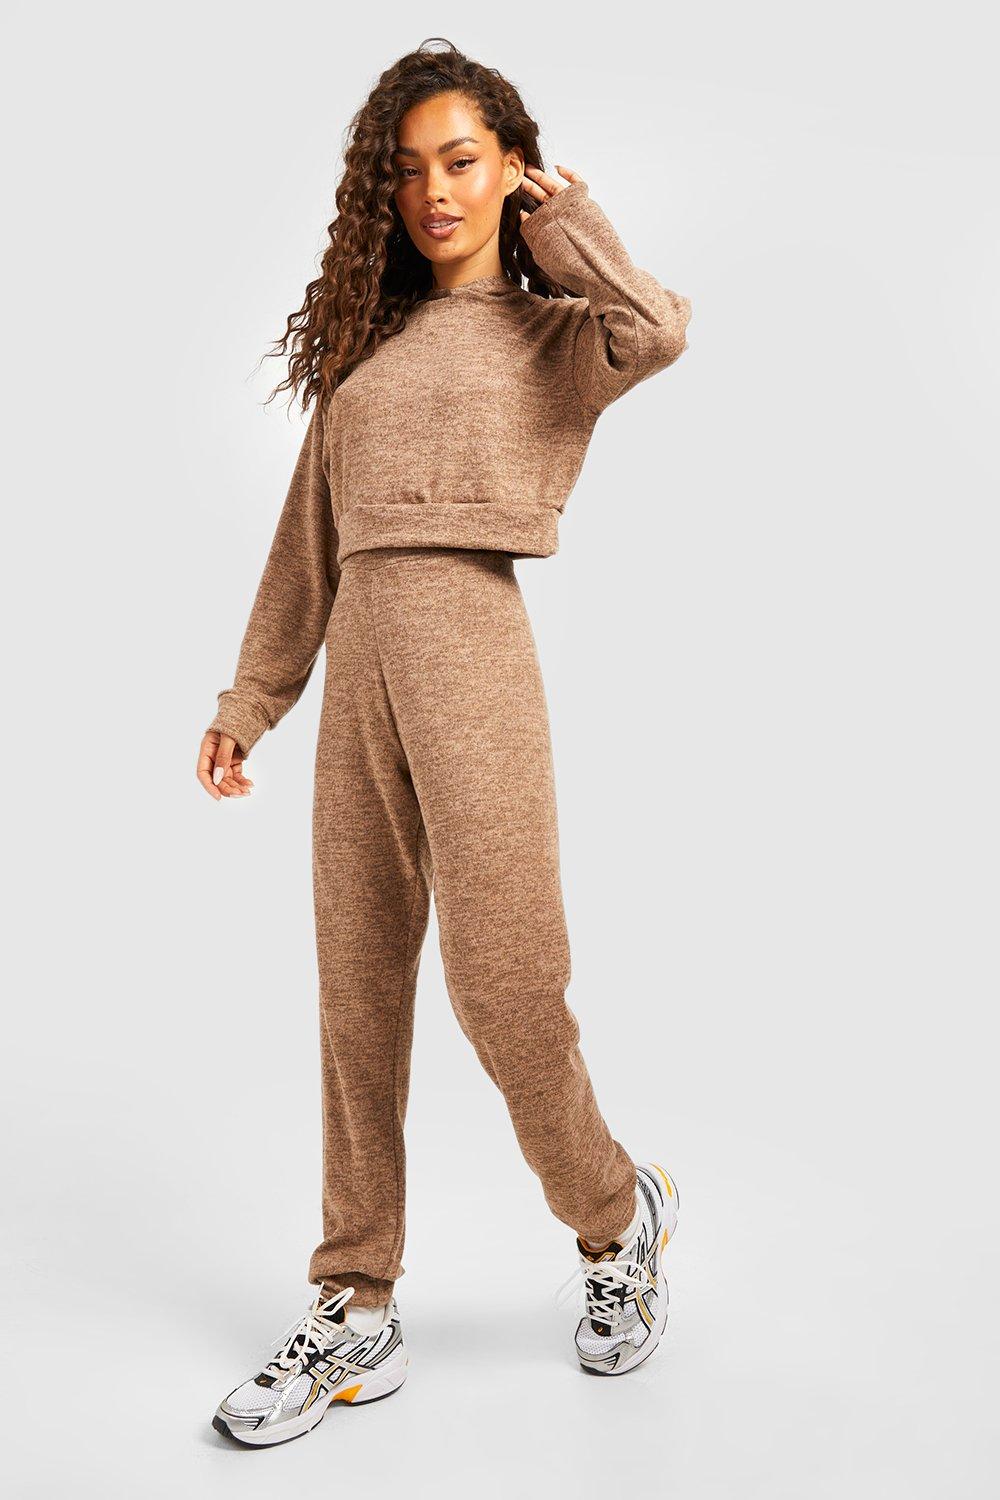 Boohoo Melange Knitted Hoody And Track Pant Co-ord Set in Camel Natural Womens Clothing Suits 